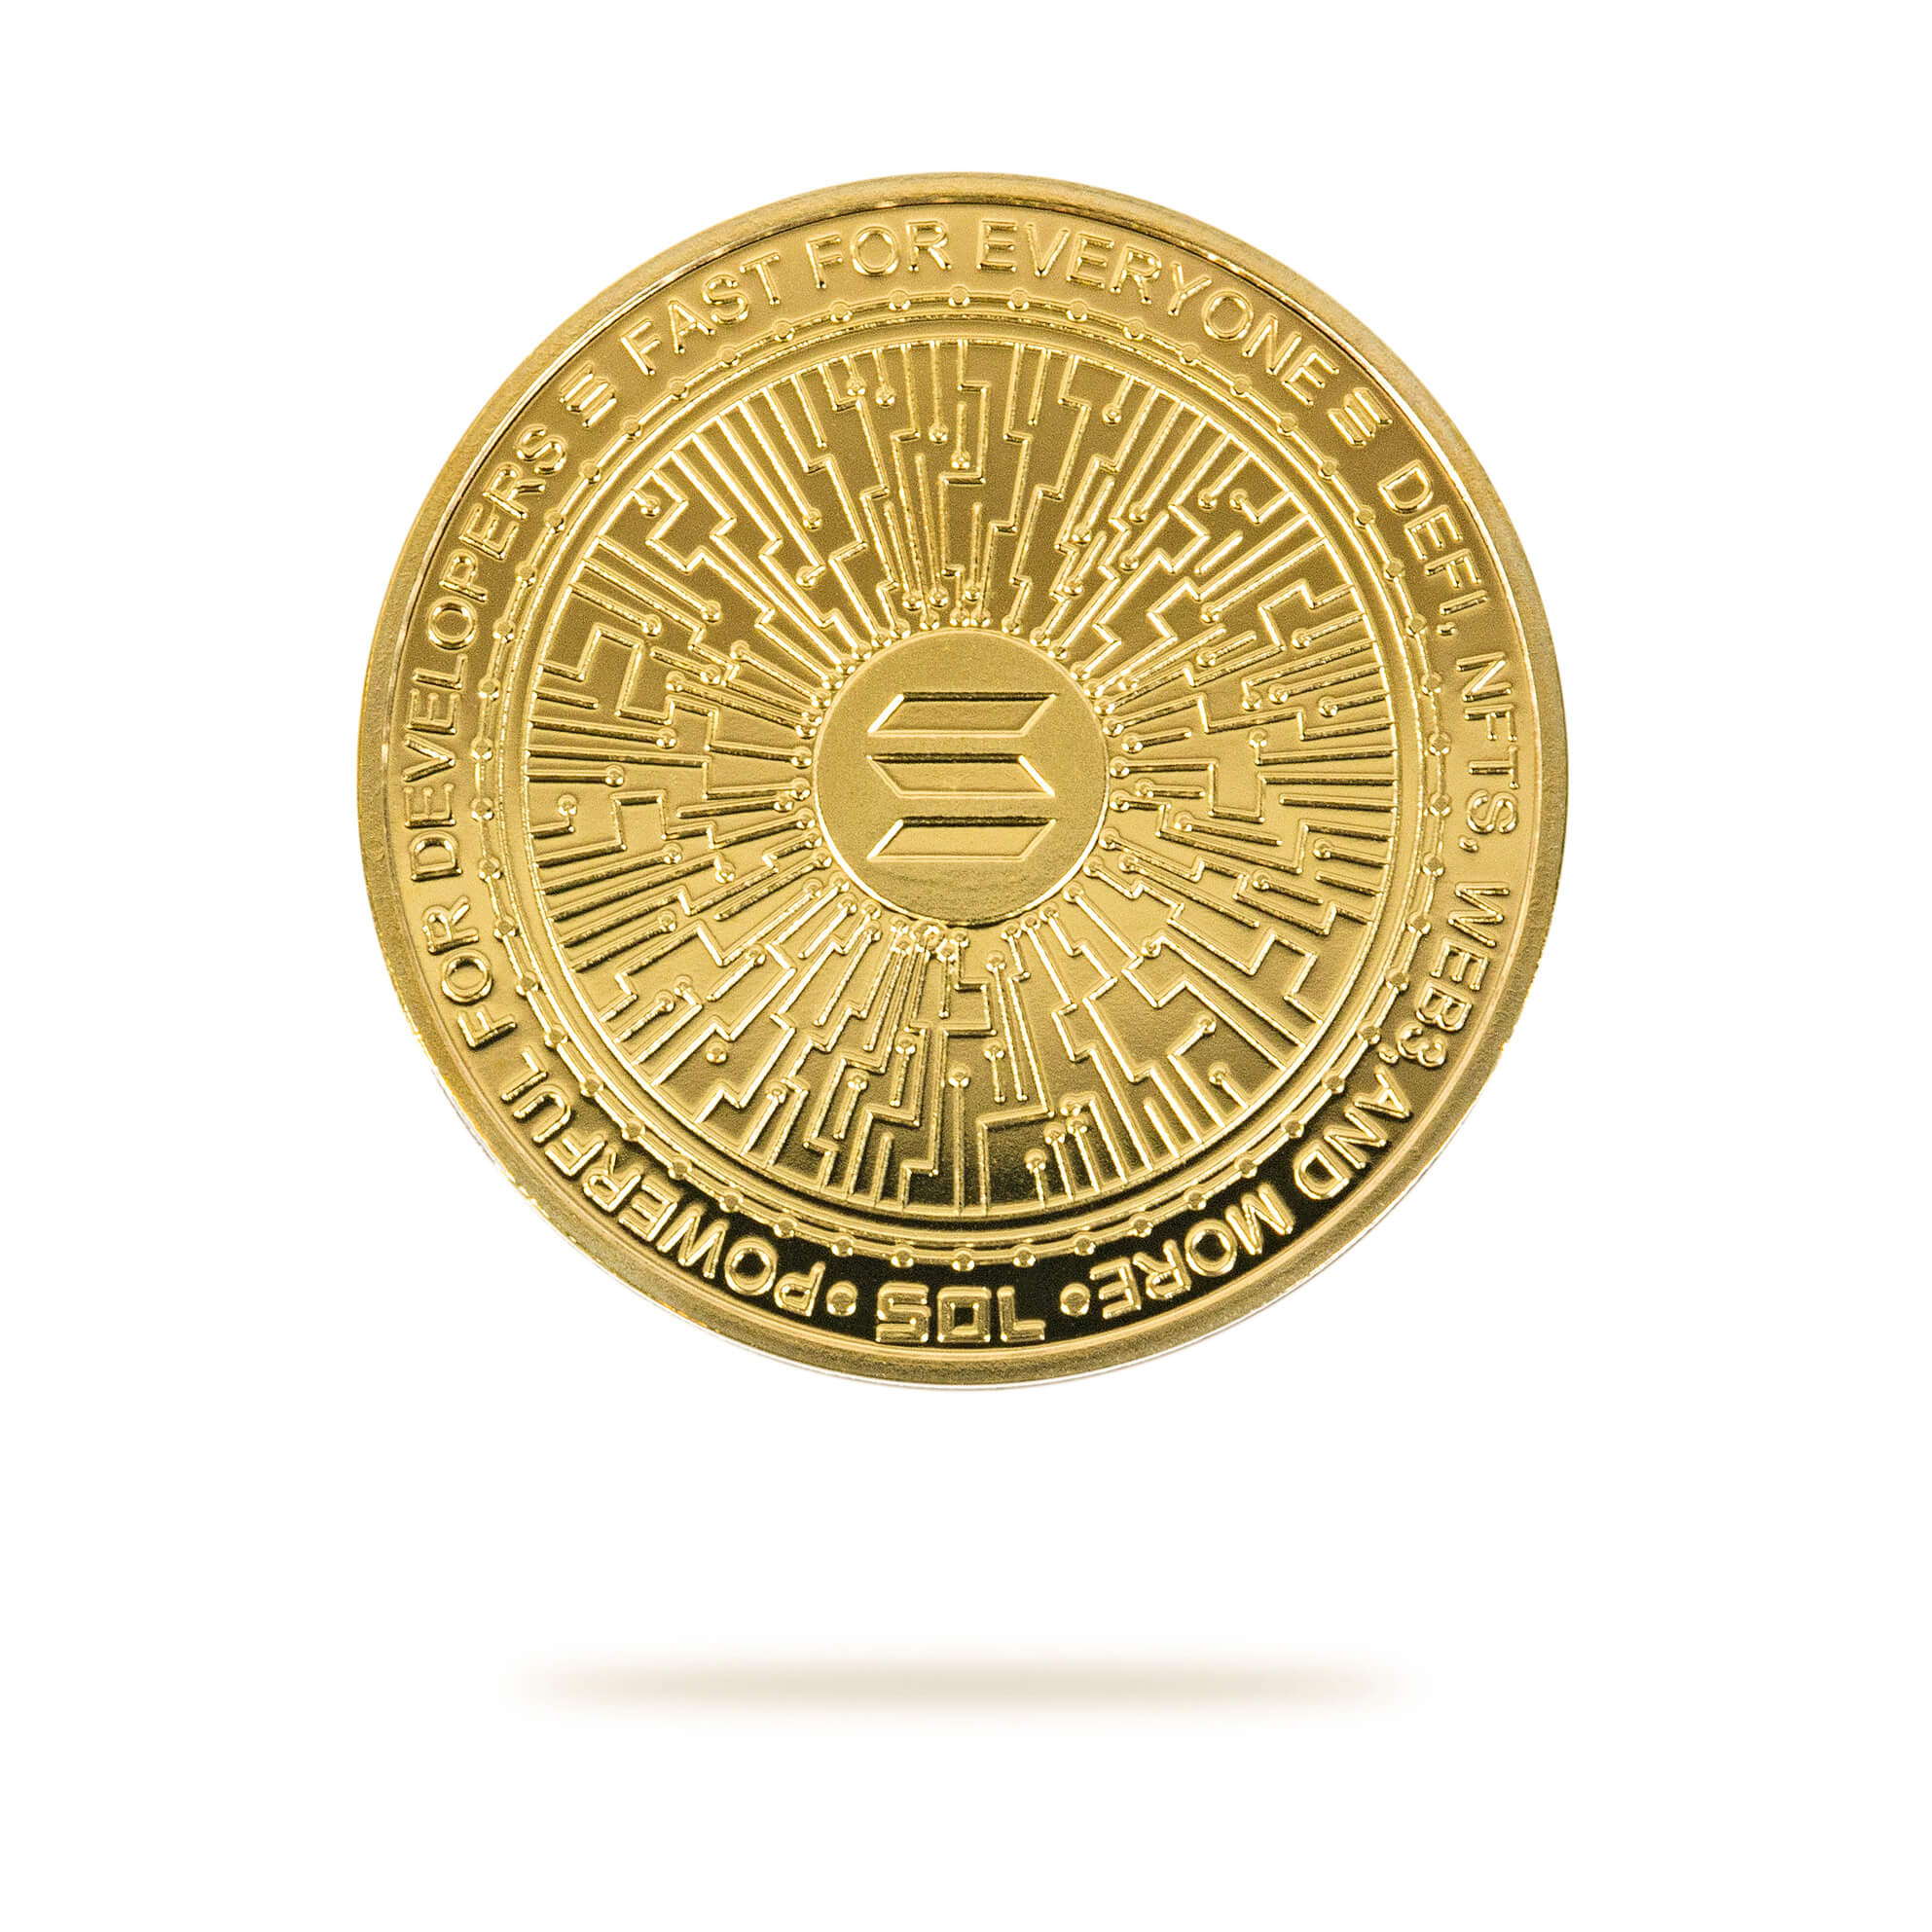 Cryptochips | Solana Physical Crypto Coin. Collectable cryptocurrency merch you can hodl